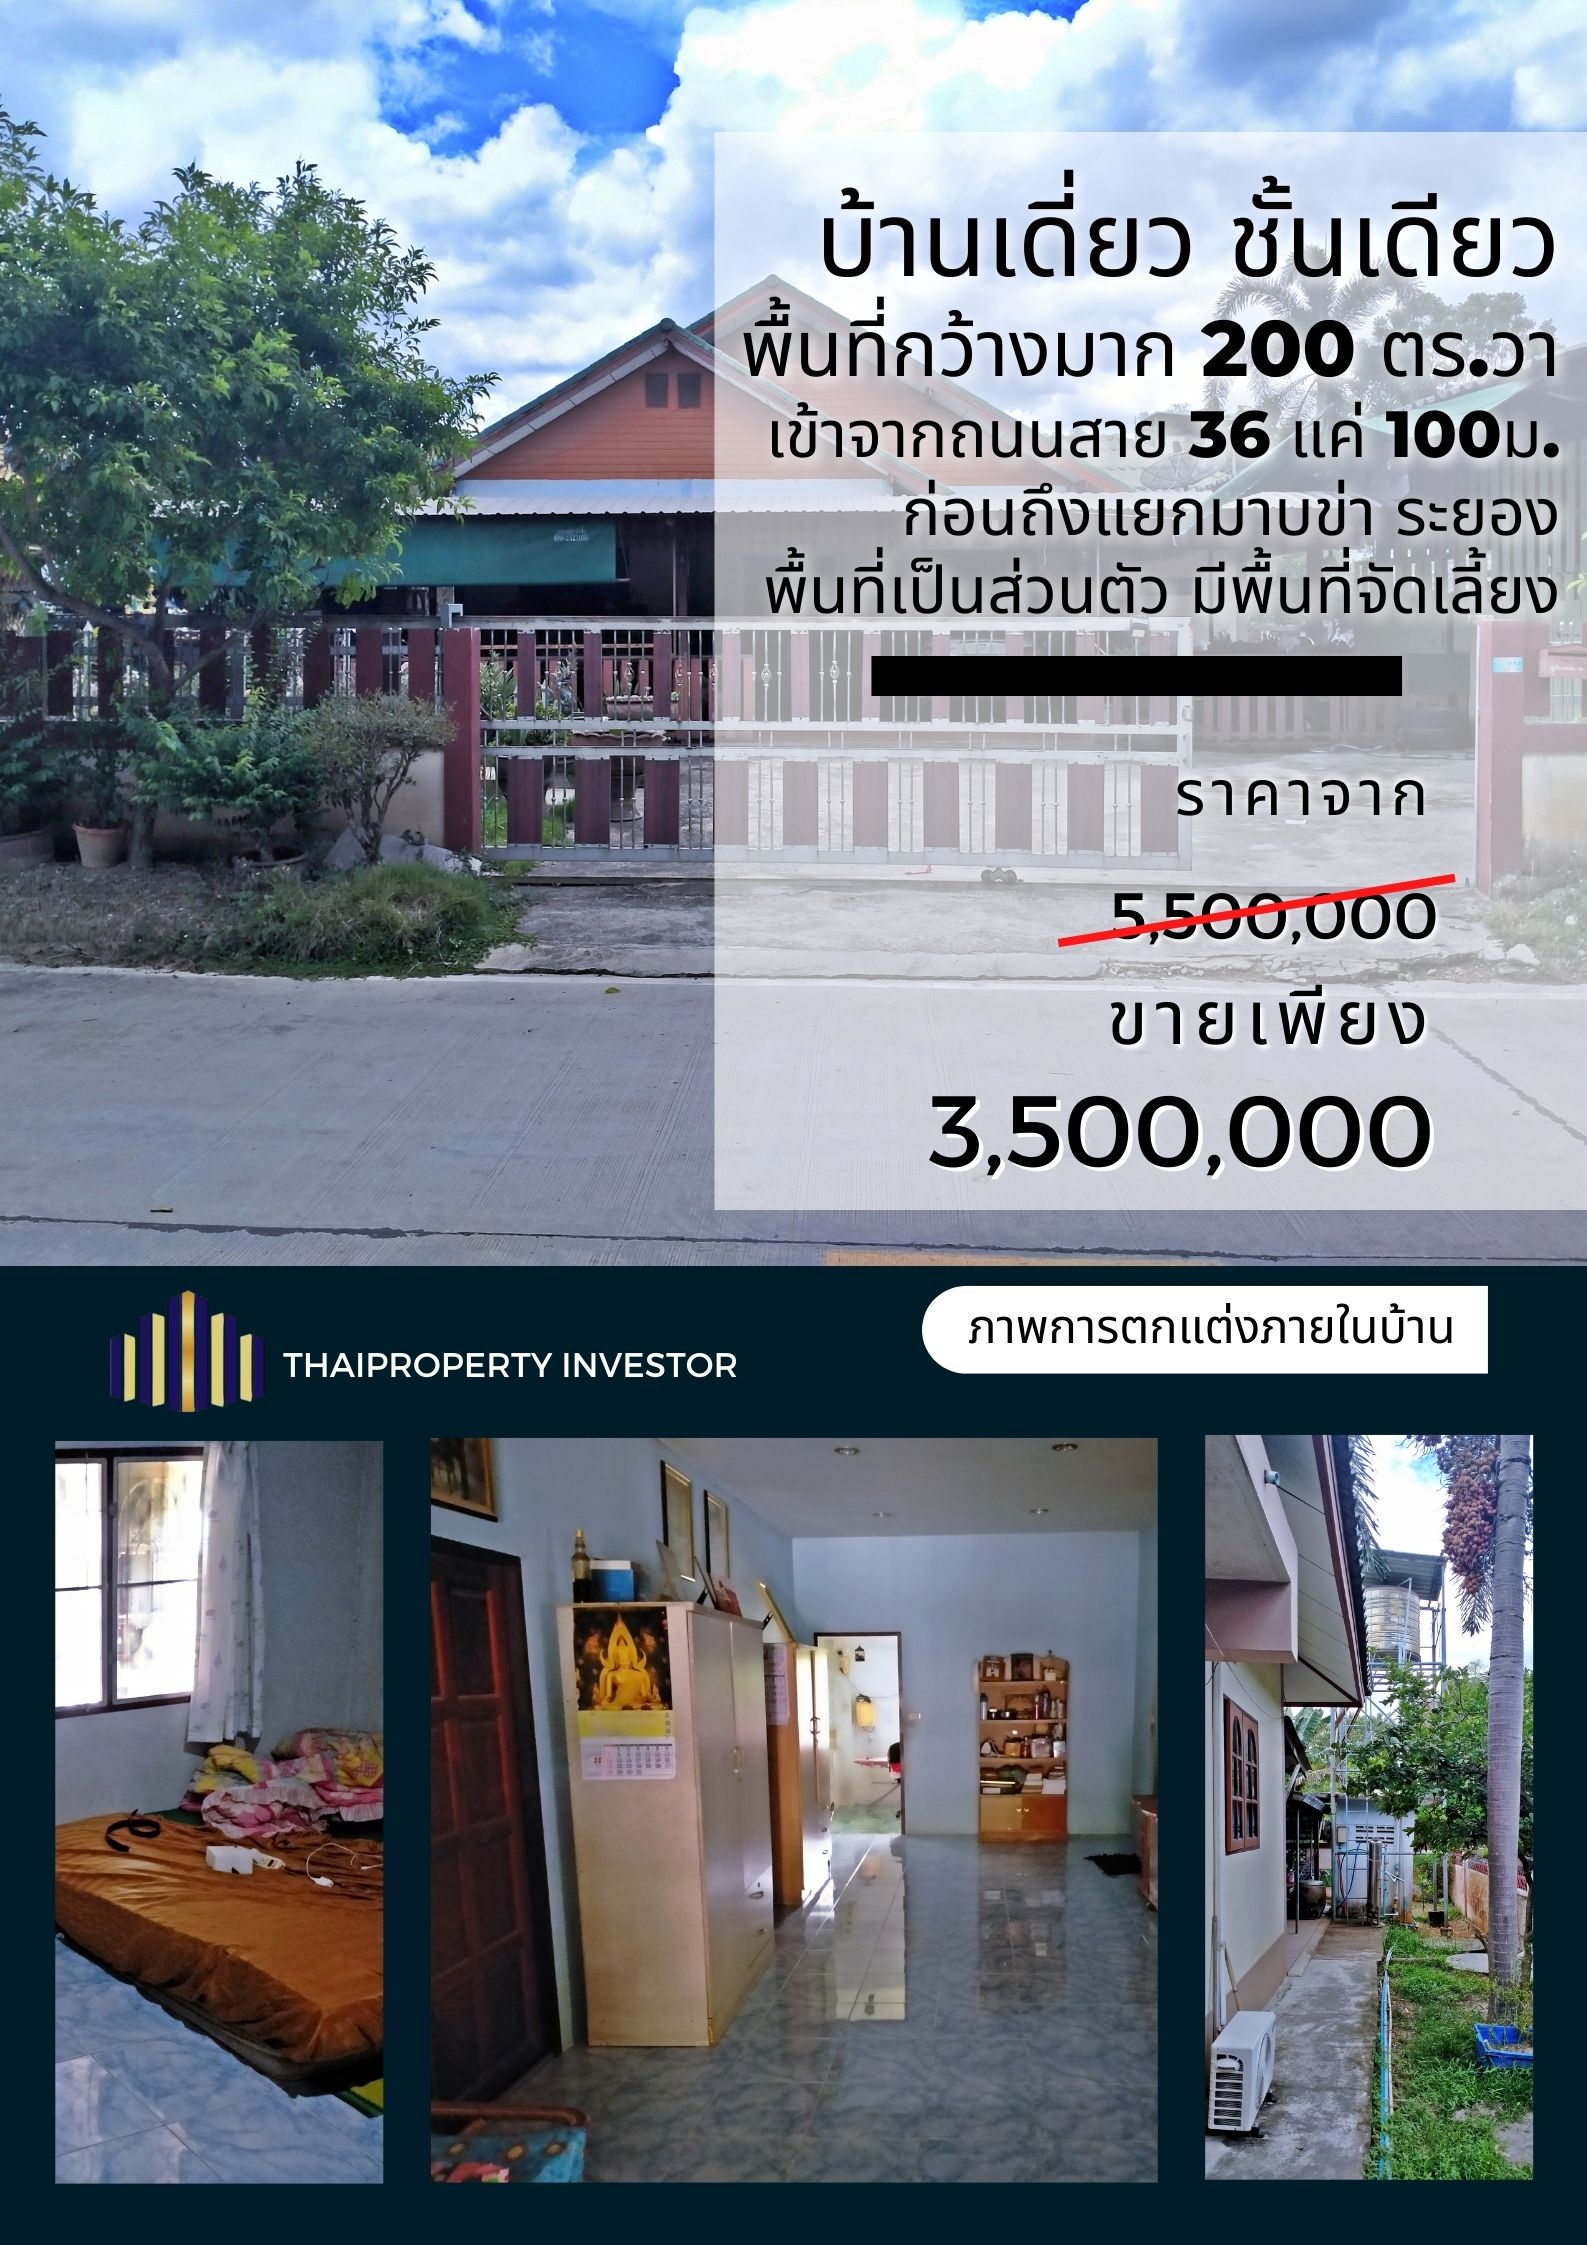 Rare !!! Very Wide Area !!! House with Land for sale, 1 floor, area 200 sq wa , near Bueng Phet restaurant , On Route36 Rayong , 6 km from RIL Industrial Estate.